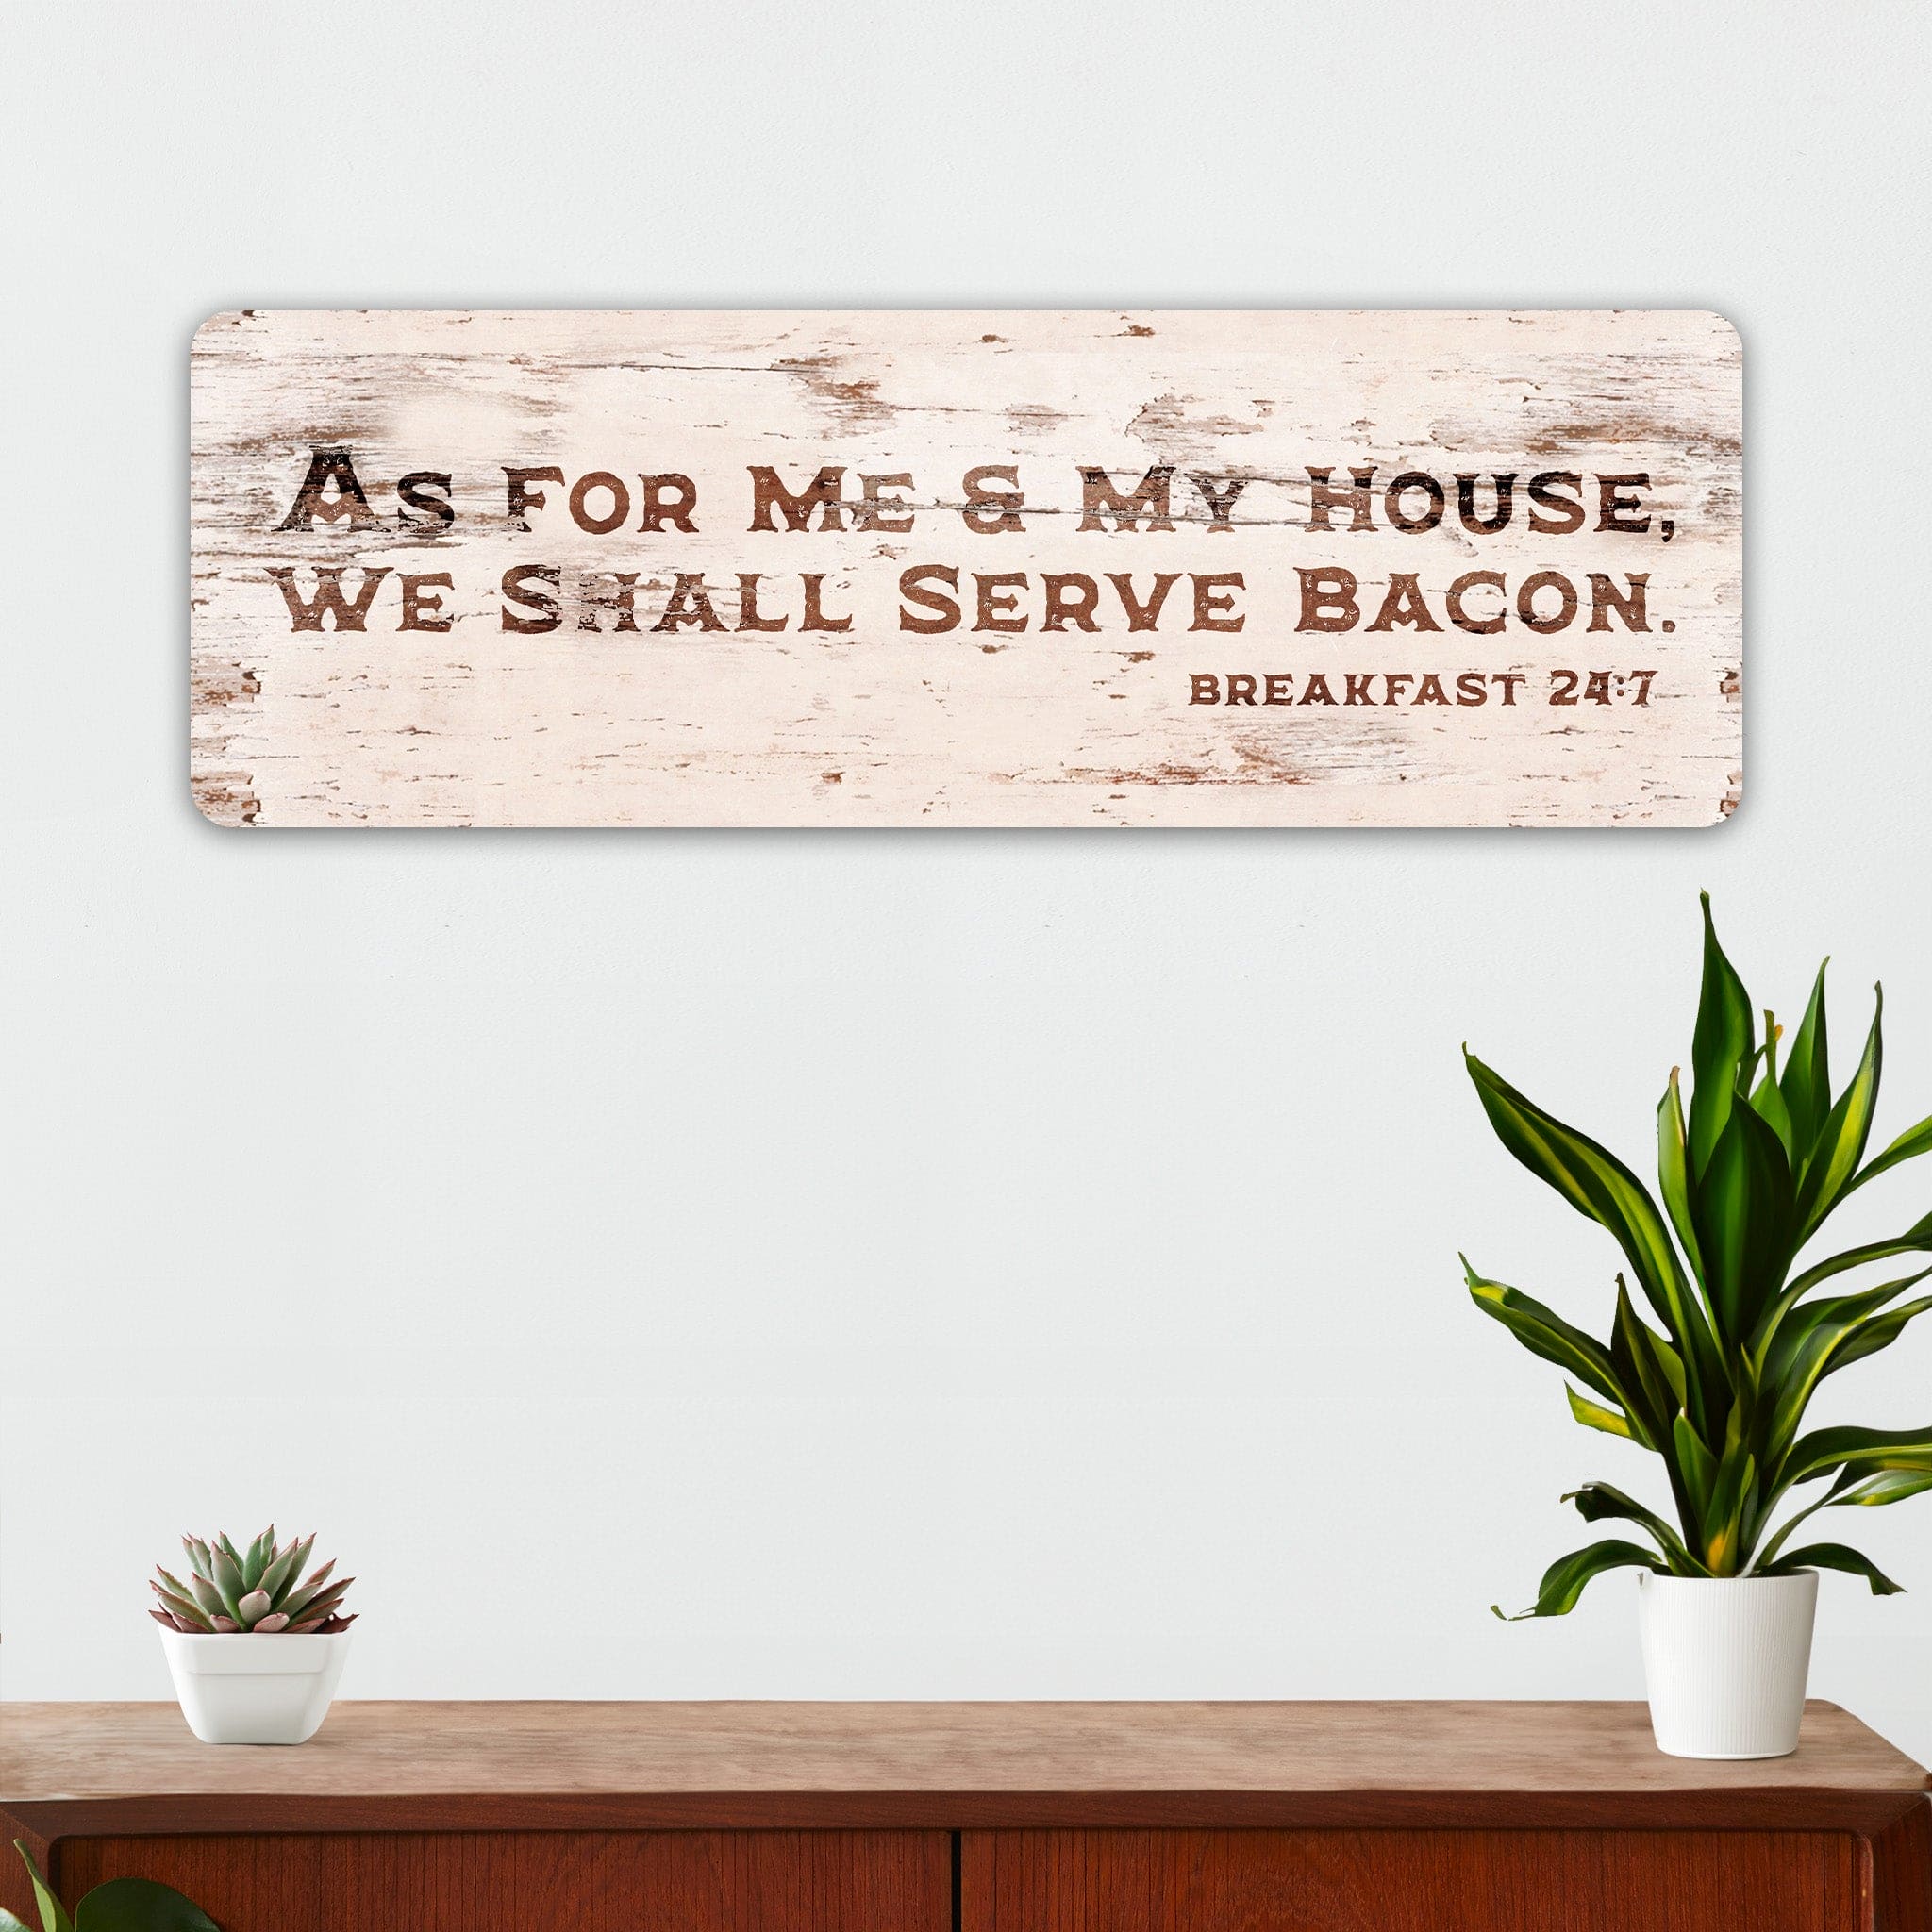 Farmhouse Kitchen Wall Decor - As For Me & My House, We Shall Serve Bacon - Metal Sign